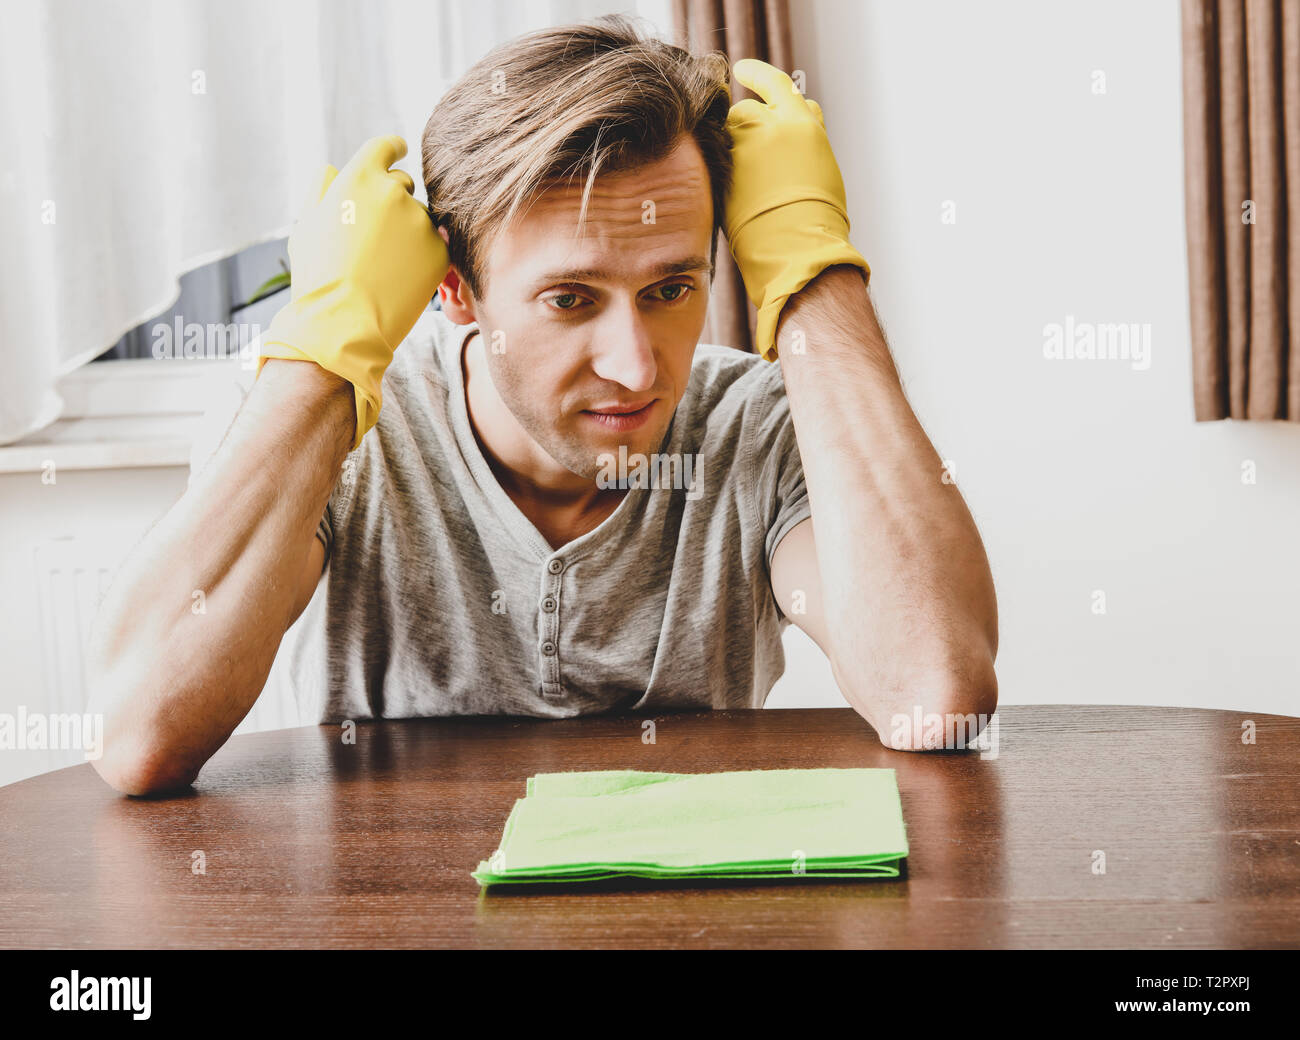 Dismay man with rubber gloves cleaning house. Housekeeper concept. Stock Photo